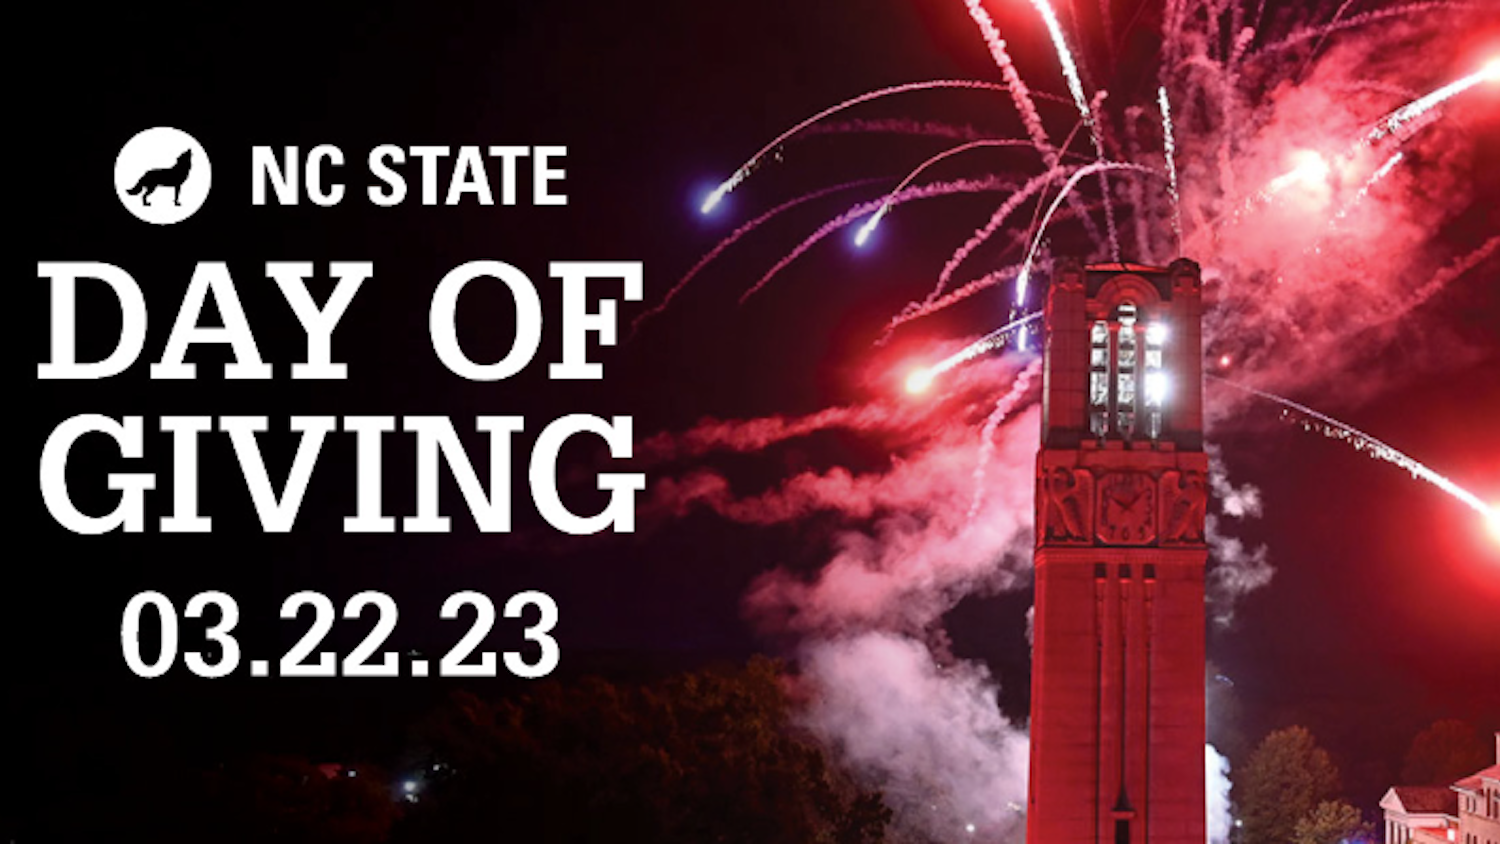 Belltower and Day of Giving 2023 info